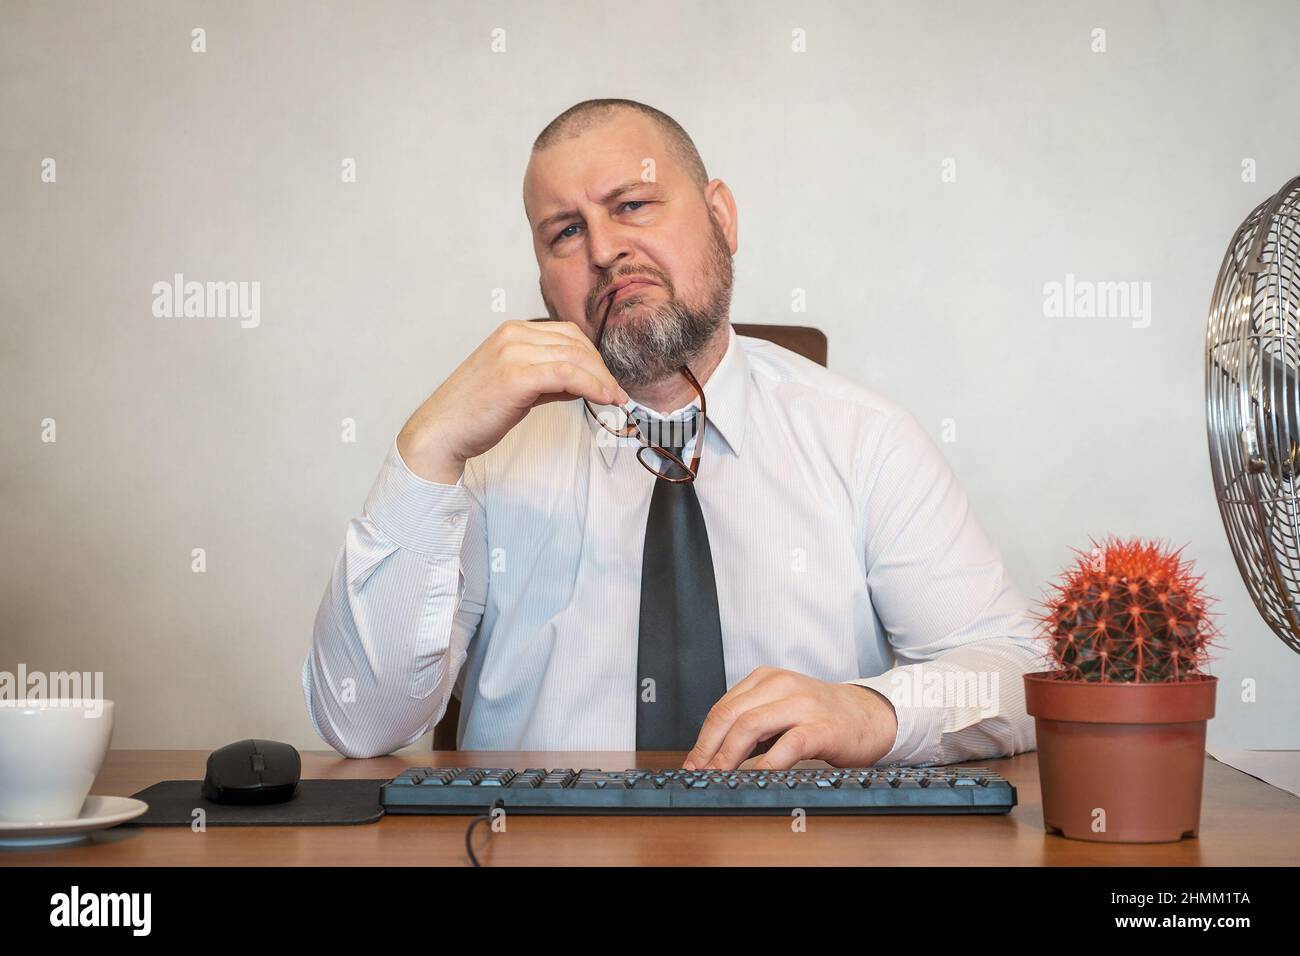 The man comically portrays the work of a businessman. He shows displeasure on his face and posture. Stock Photo